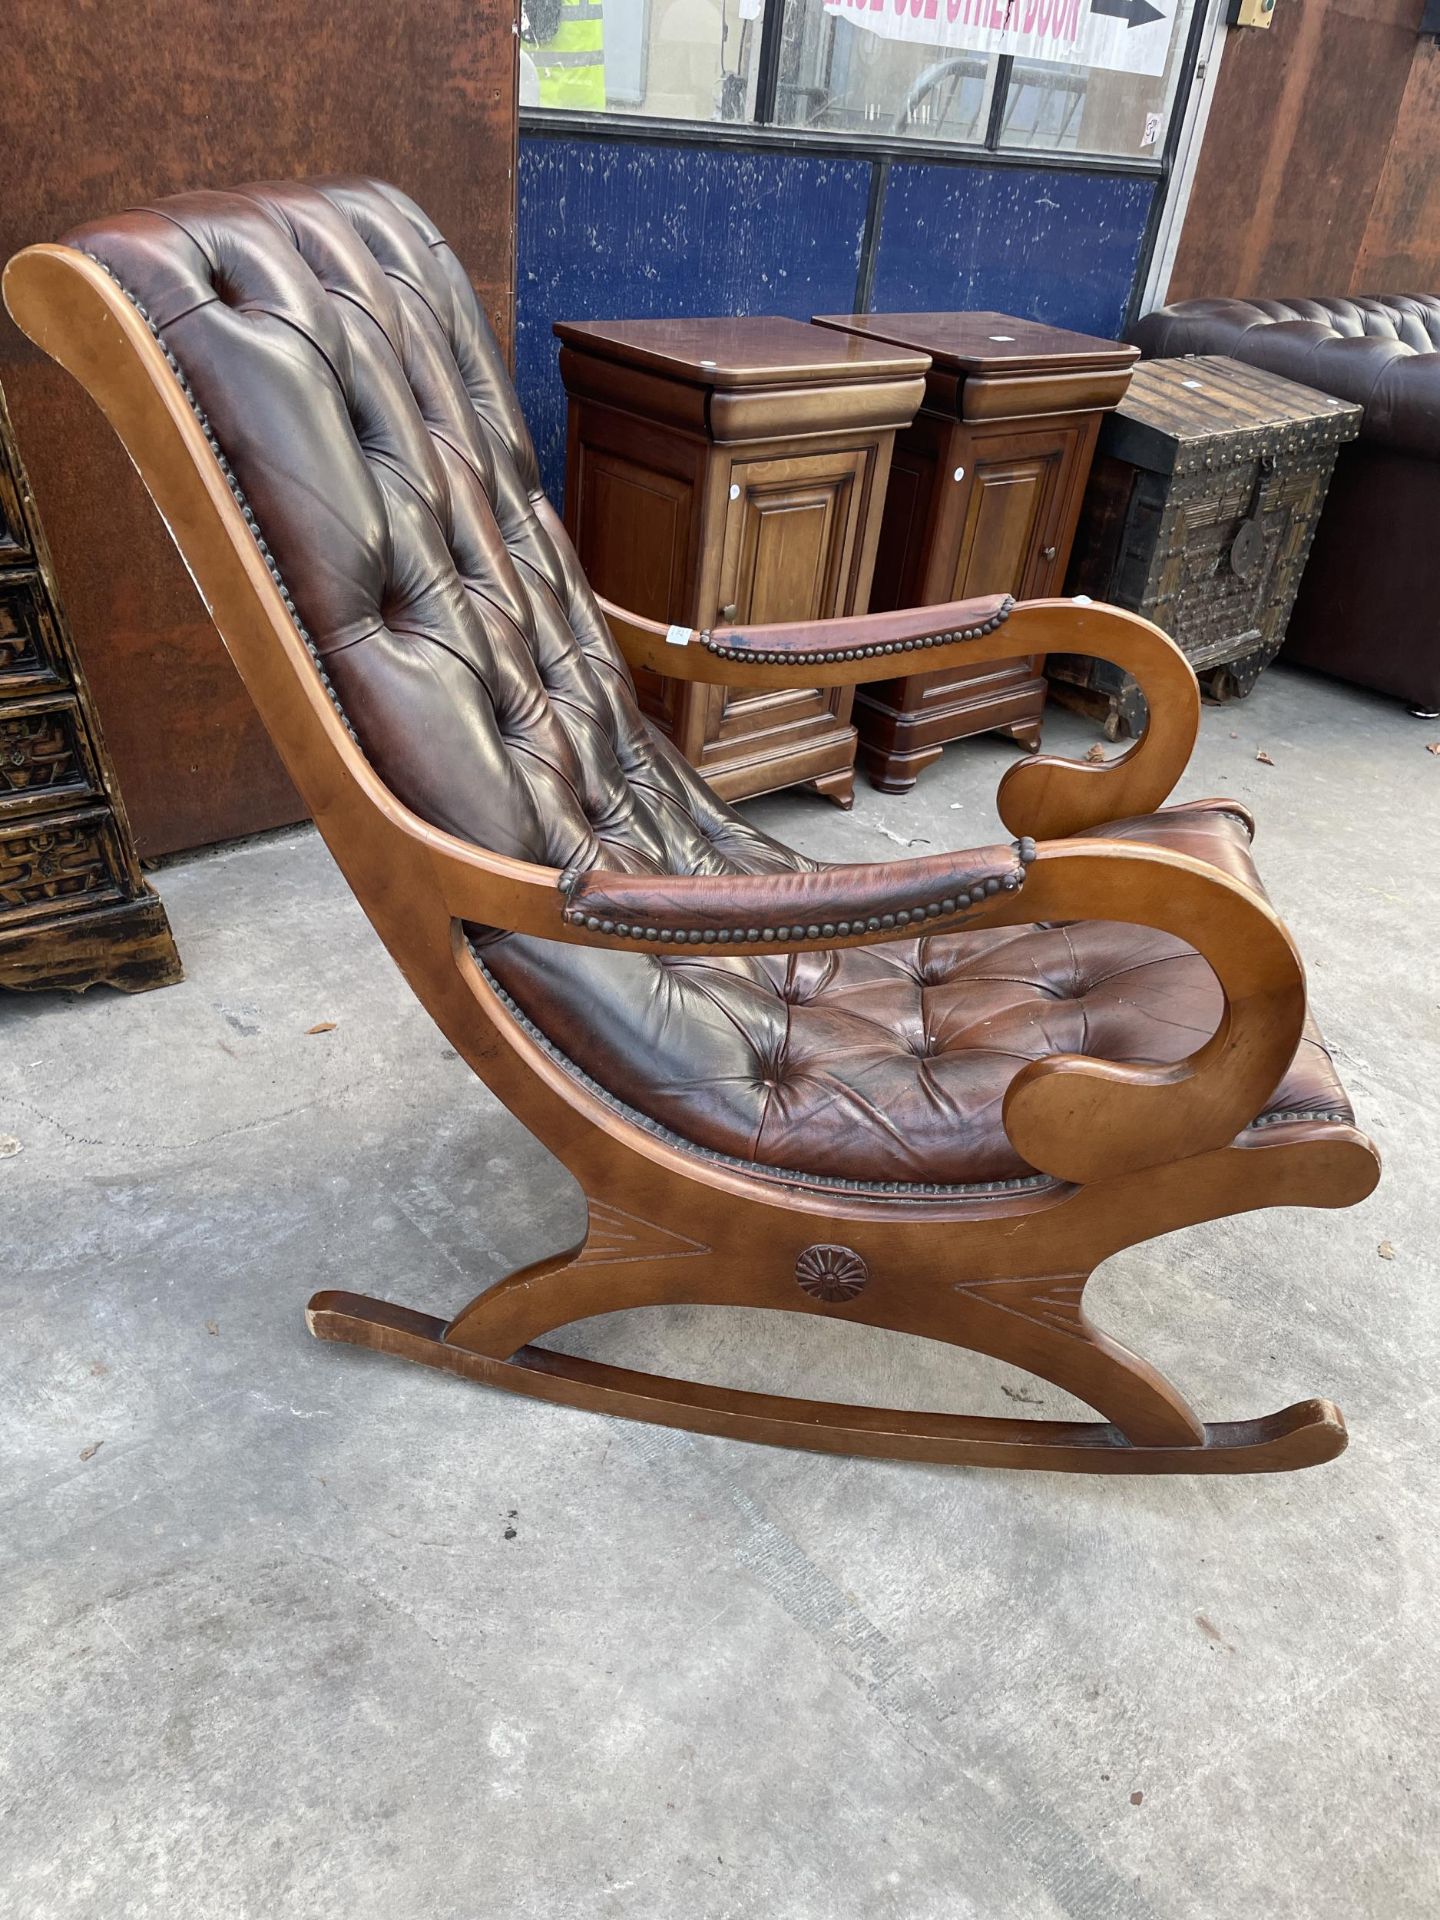 A MODERN SLIPPER LEATHER BUTTON-BACK ROCKING CHAIR - Image 2 of 4